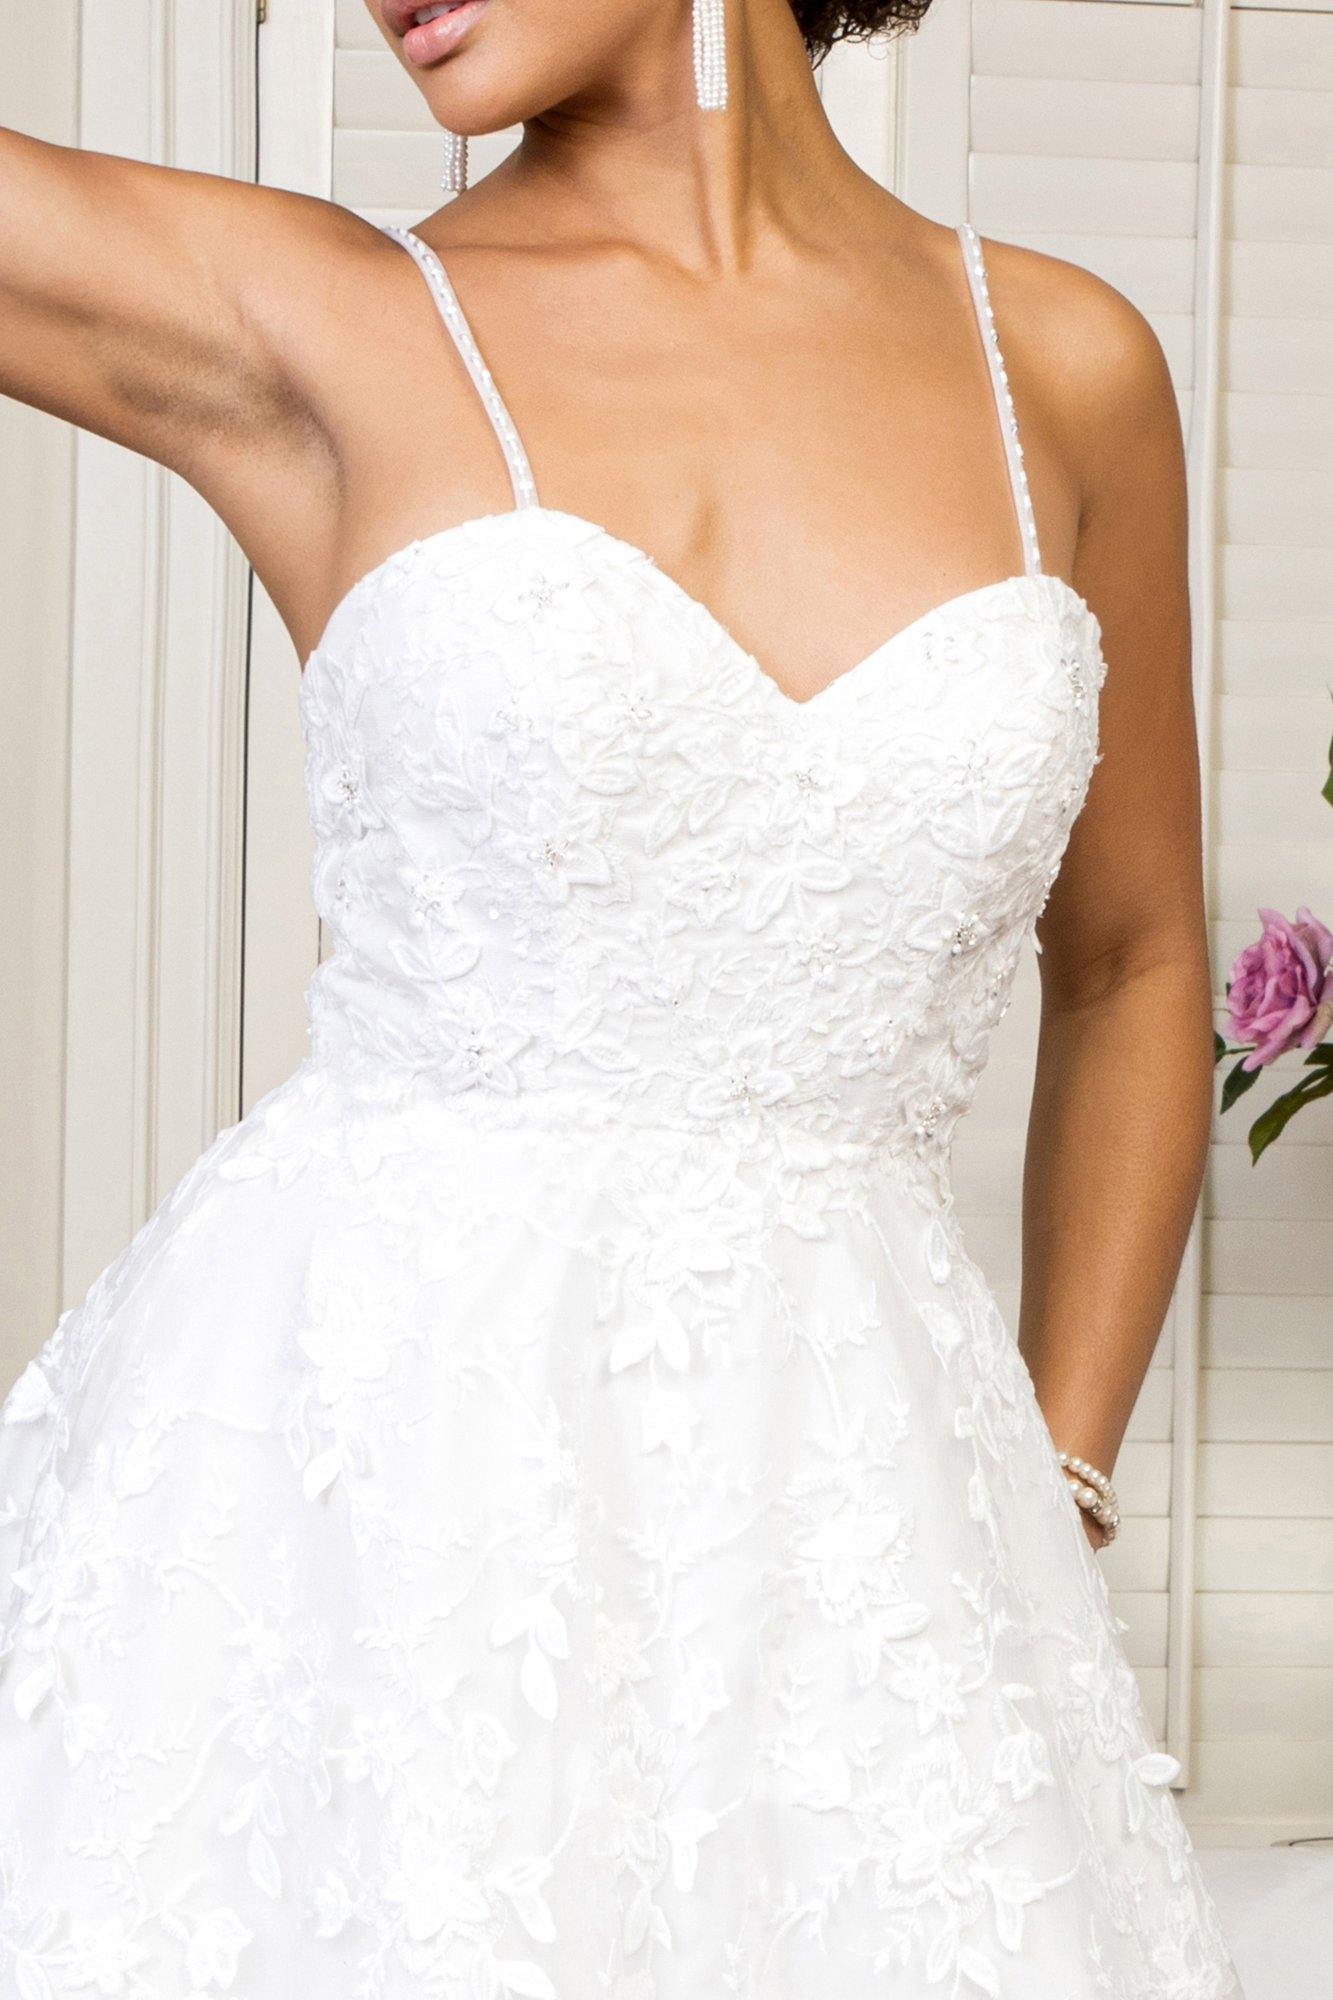 Simple Long Spaghetti Strap Floral Mesh Wedding Gown - The Dress Outlet